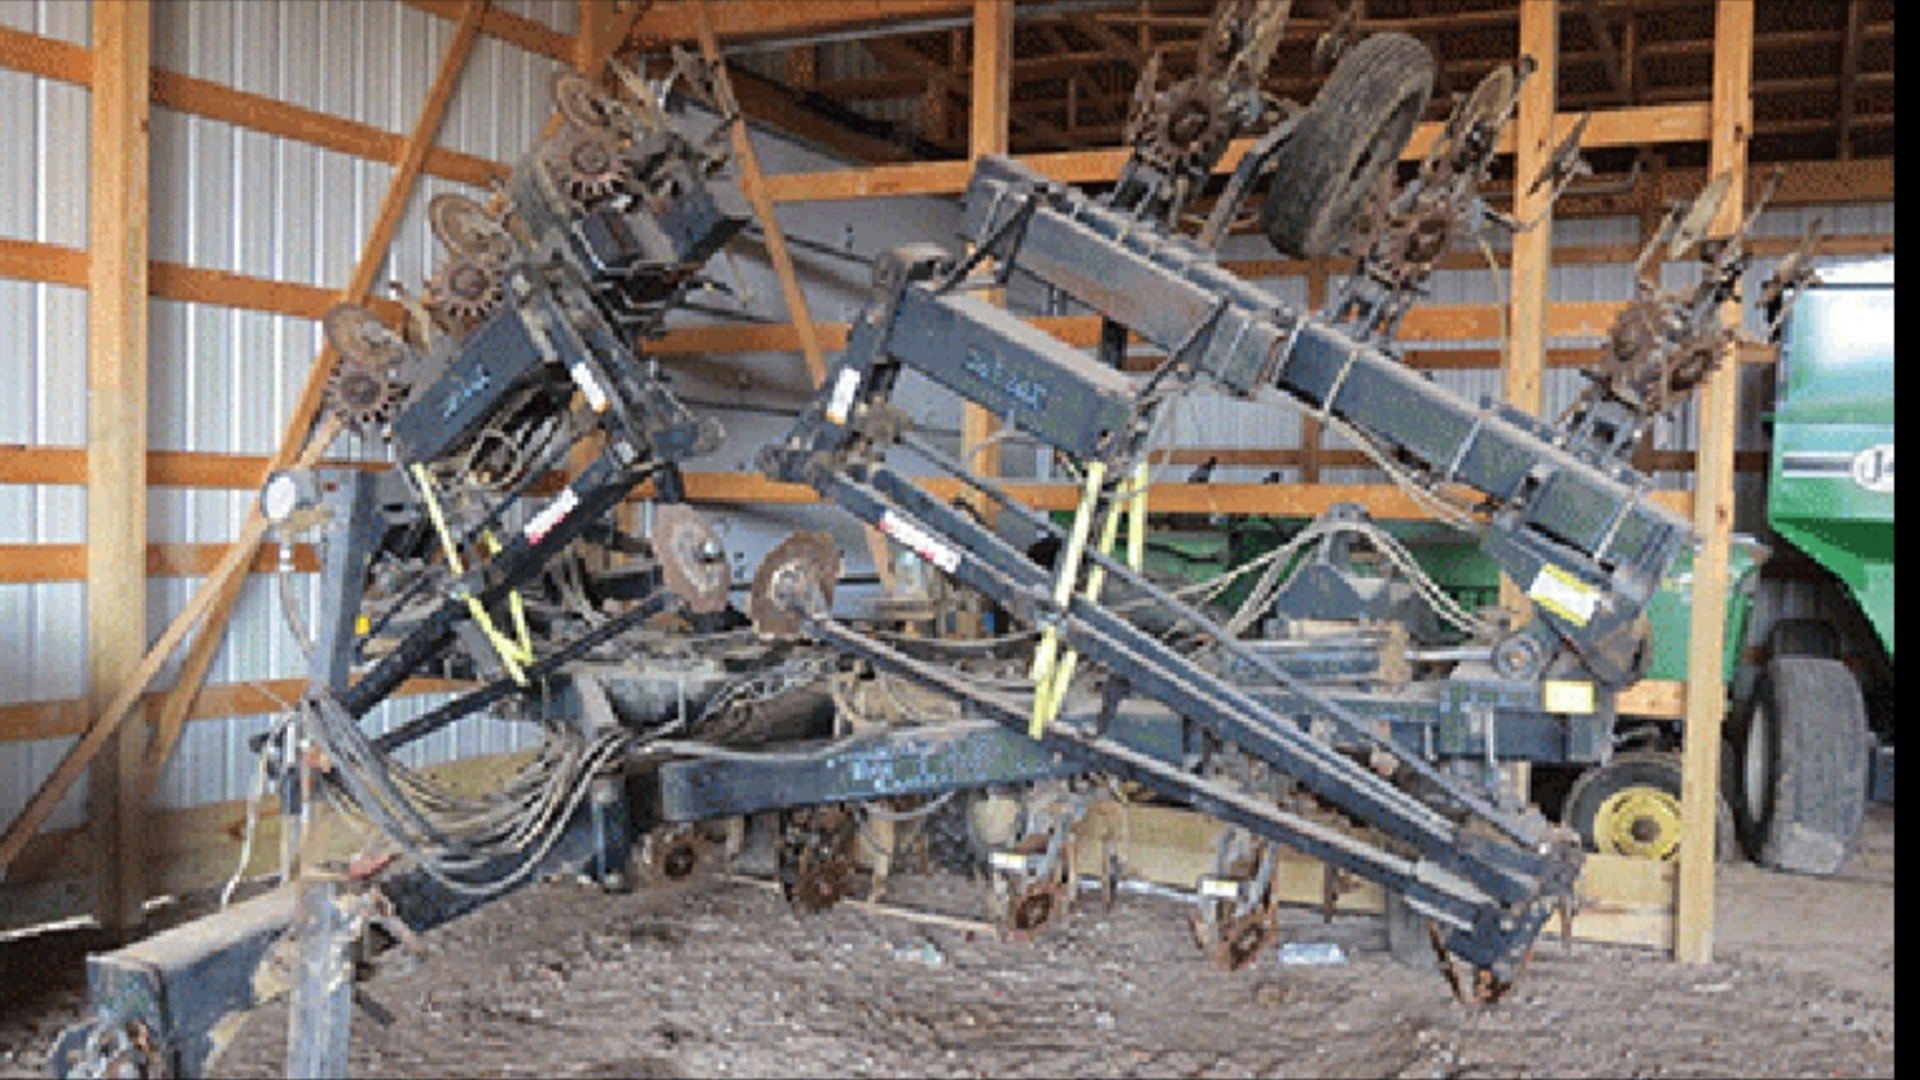 Yetter 12 row x 30 in. strip till, pull type, hyd. fold, Maverick units, yetter  markers